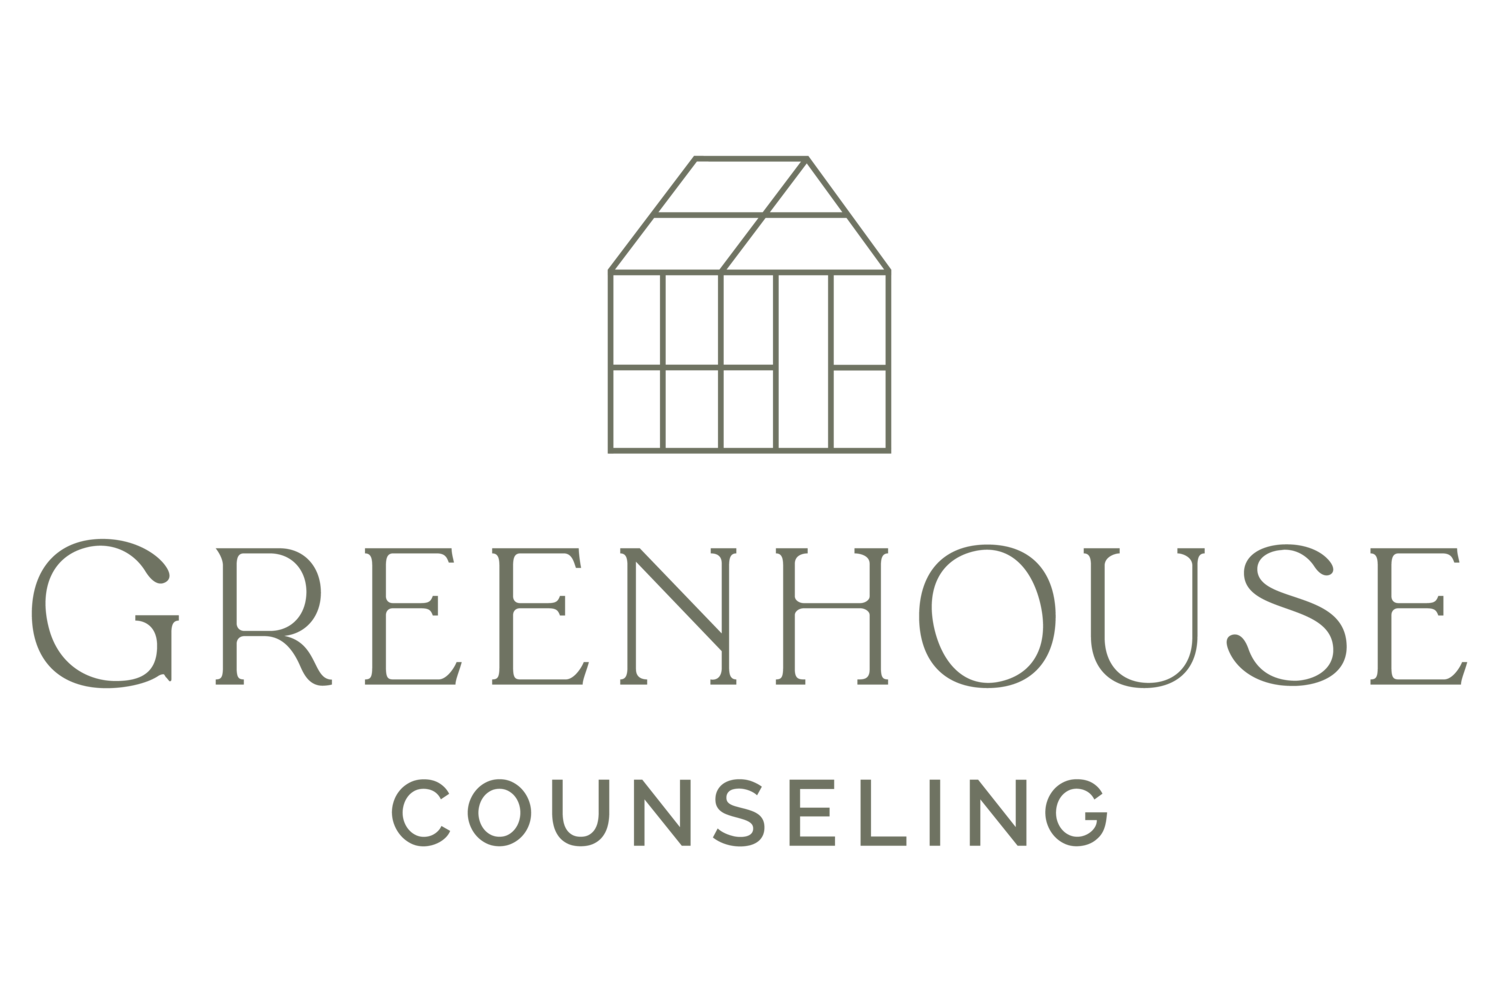 Greenhouse Counseling